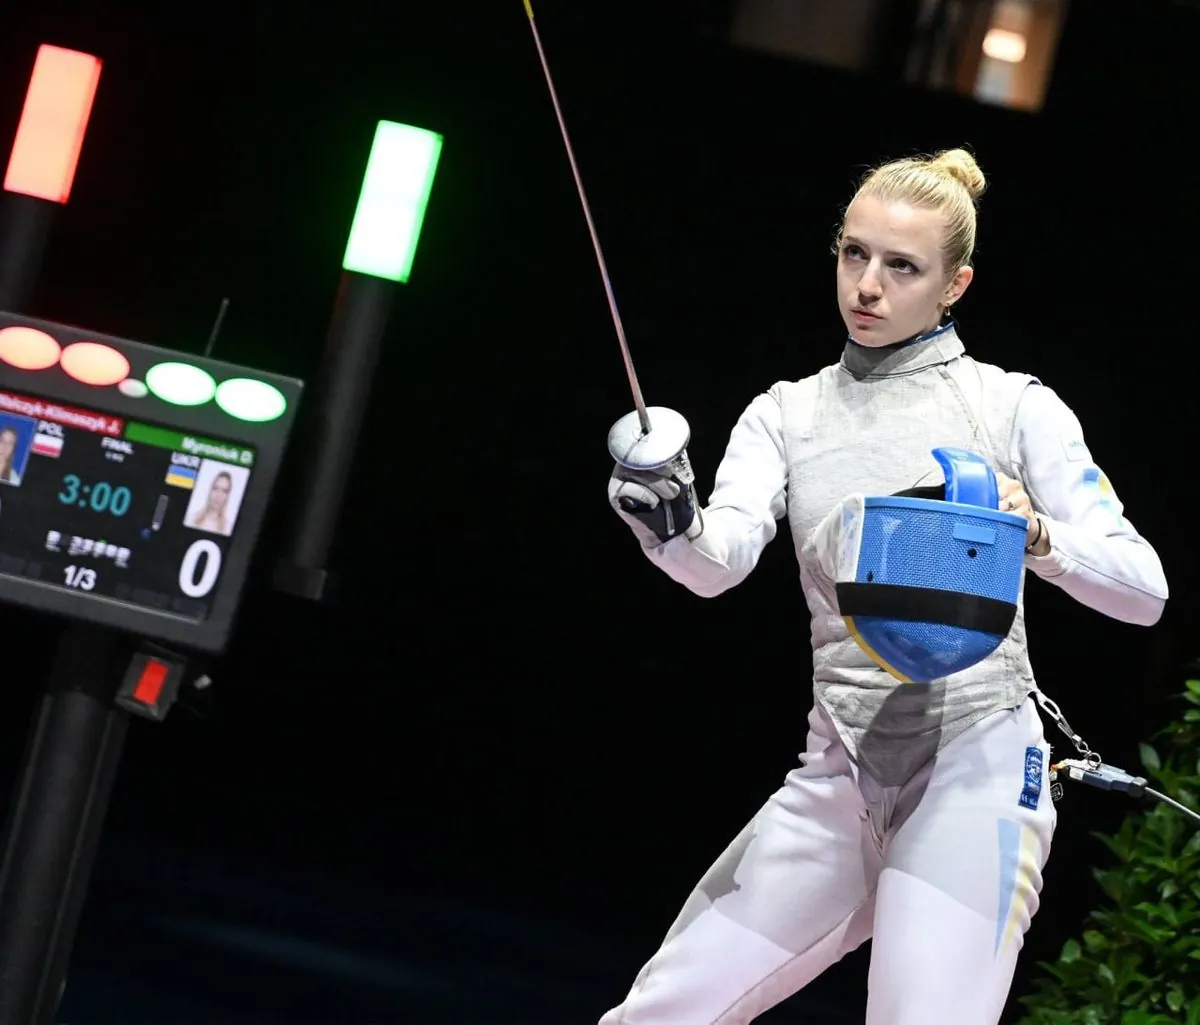 The Ukrainian won "silver" of the European Fencing Championship